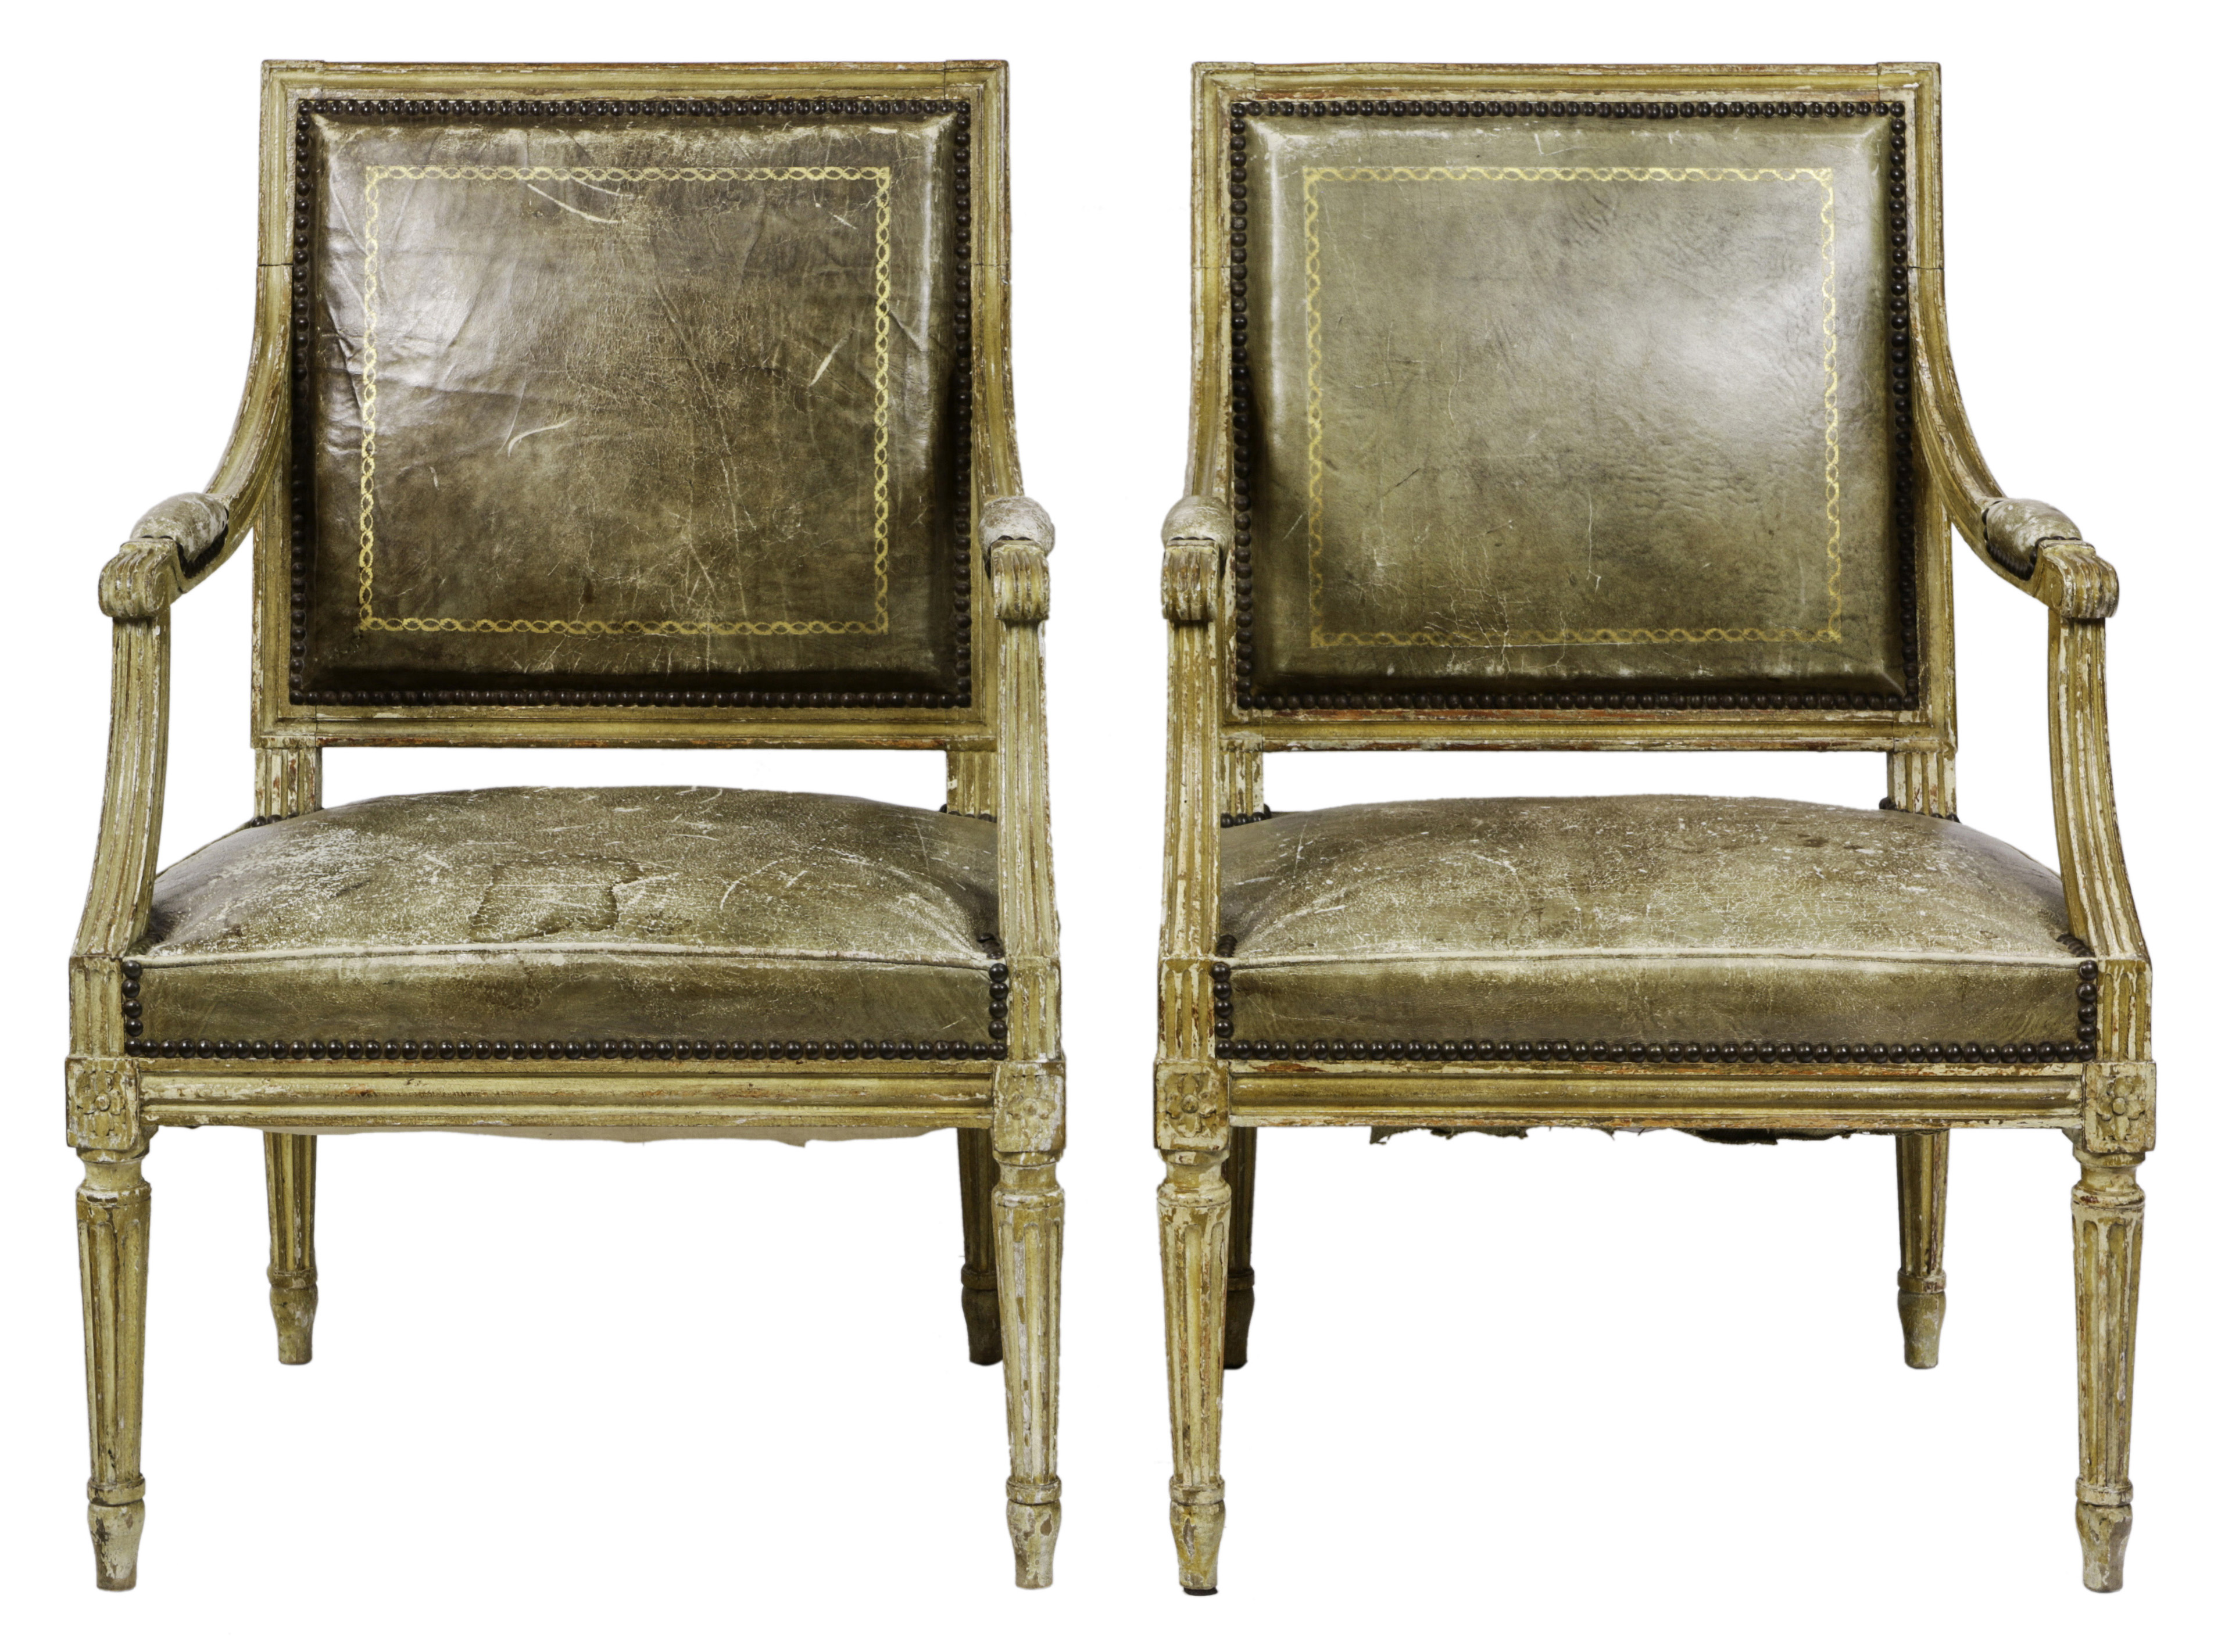 A PAIR OF NEOCLASSICAL STYLE ARMCHAIRS